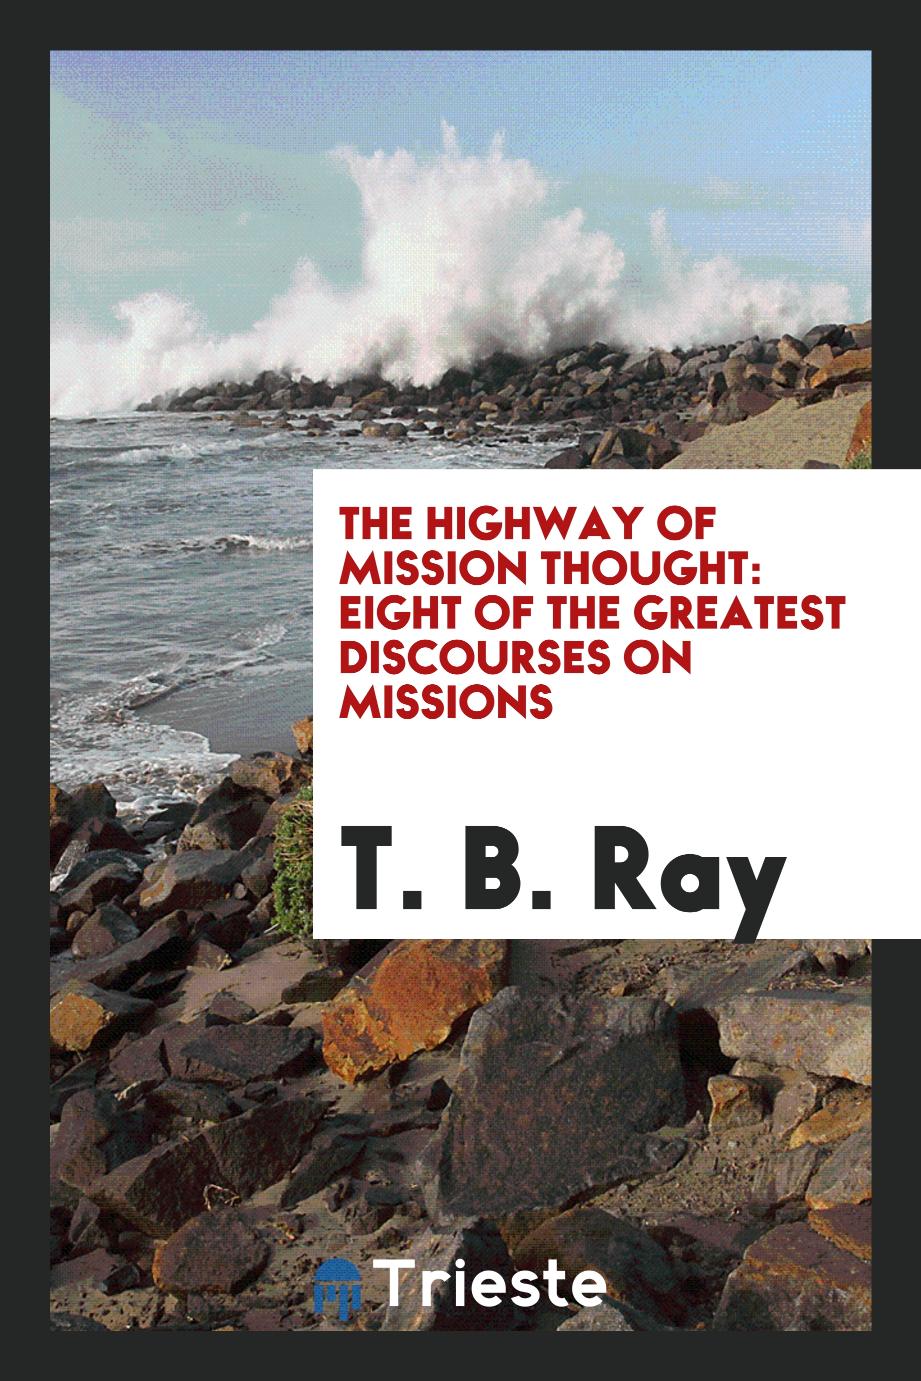 The Highway of mission thought: eight of the greatest discourses on missions